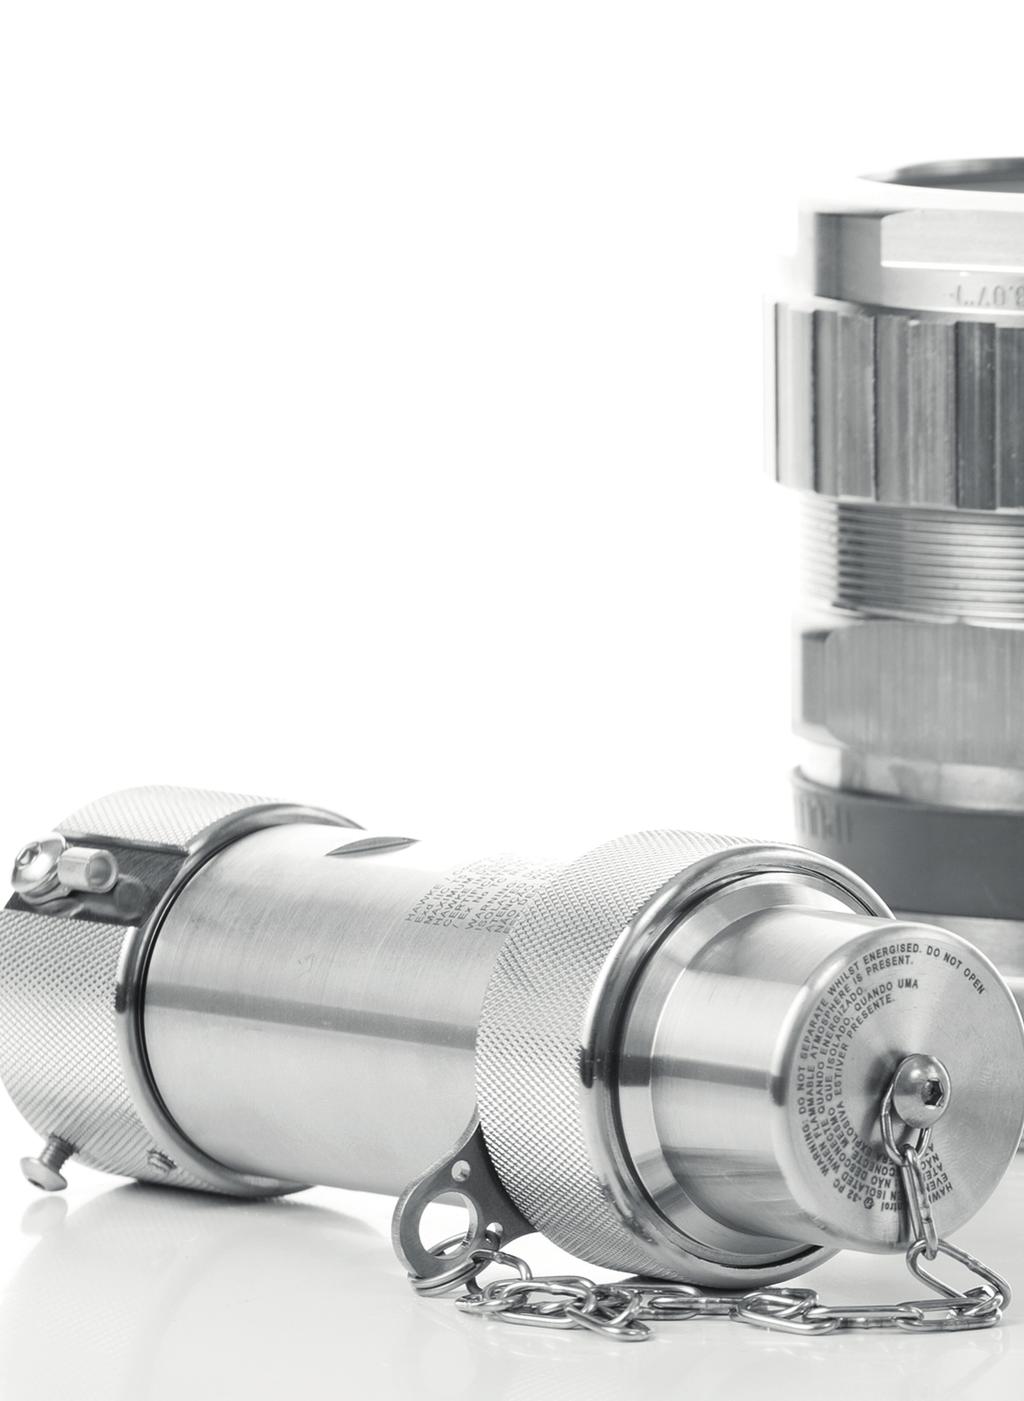 HAWKE INTERNATIONAL Founded in 1955, Hawke International are known for their market leading cable gland business and also boast an extensive range of enclosures, hazardous area connectors, control